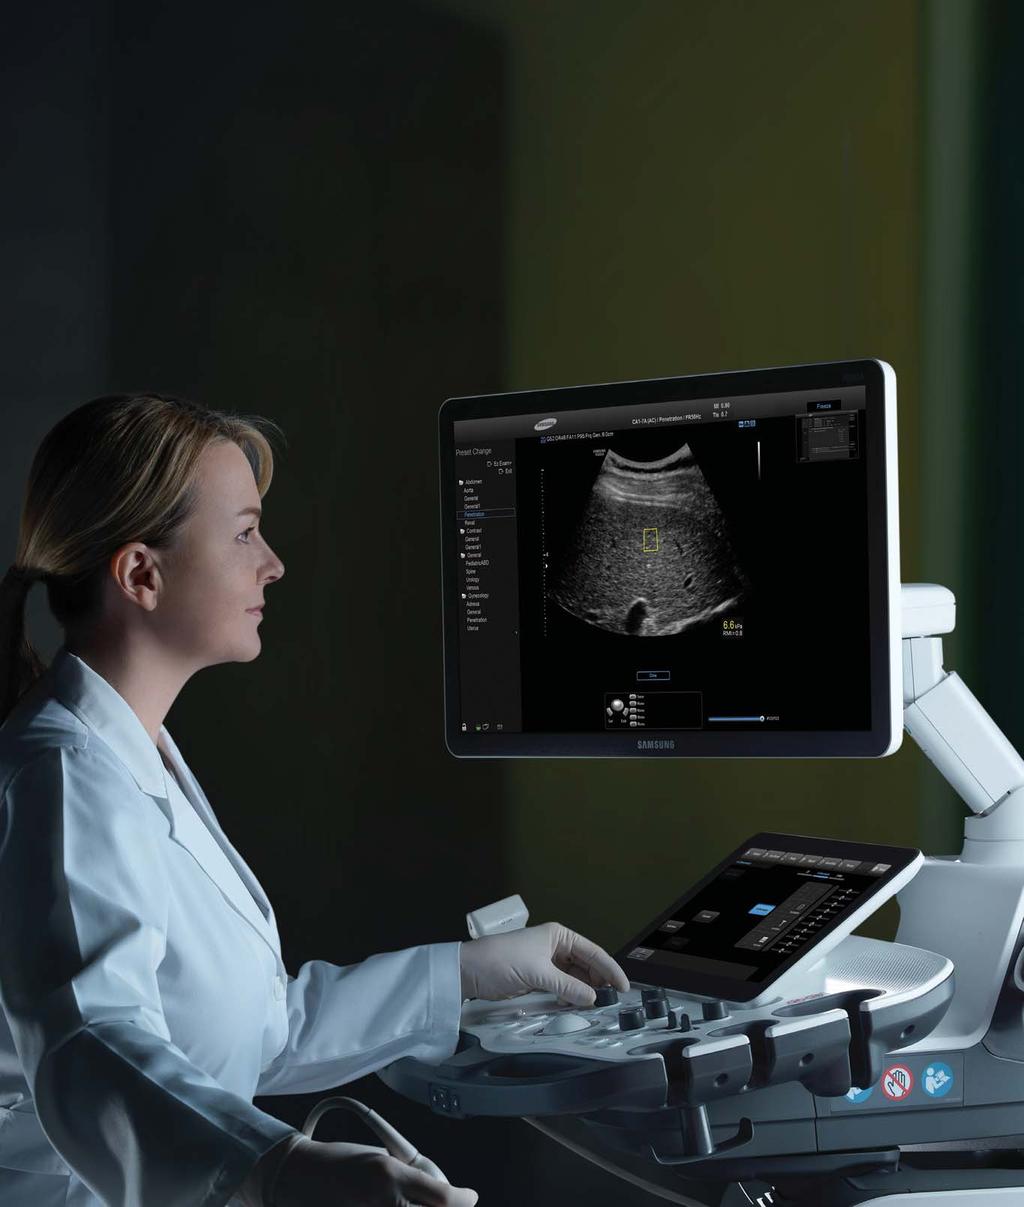 Cutting-edge technology for diagnostic challenges With advanced technologies like